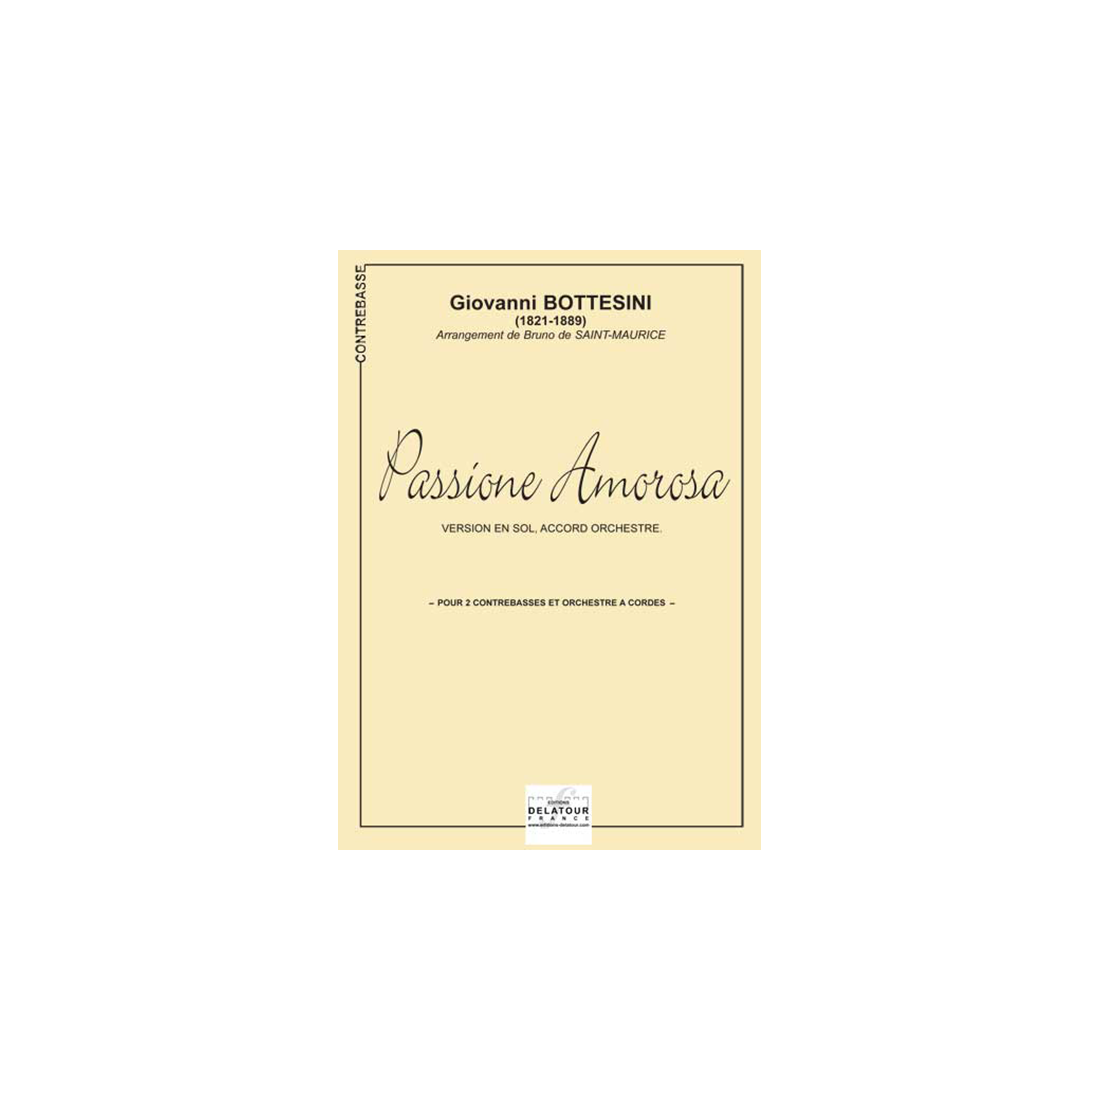 Passione amorosa for 2 double basses (G version)